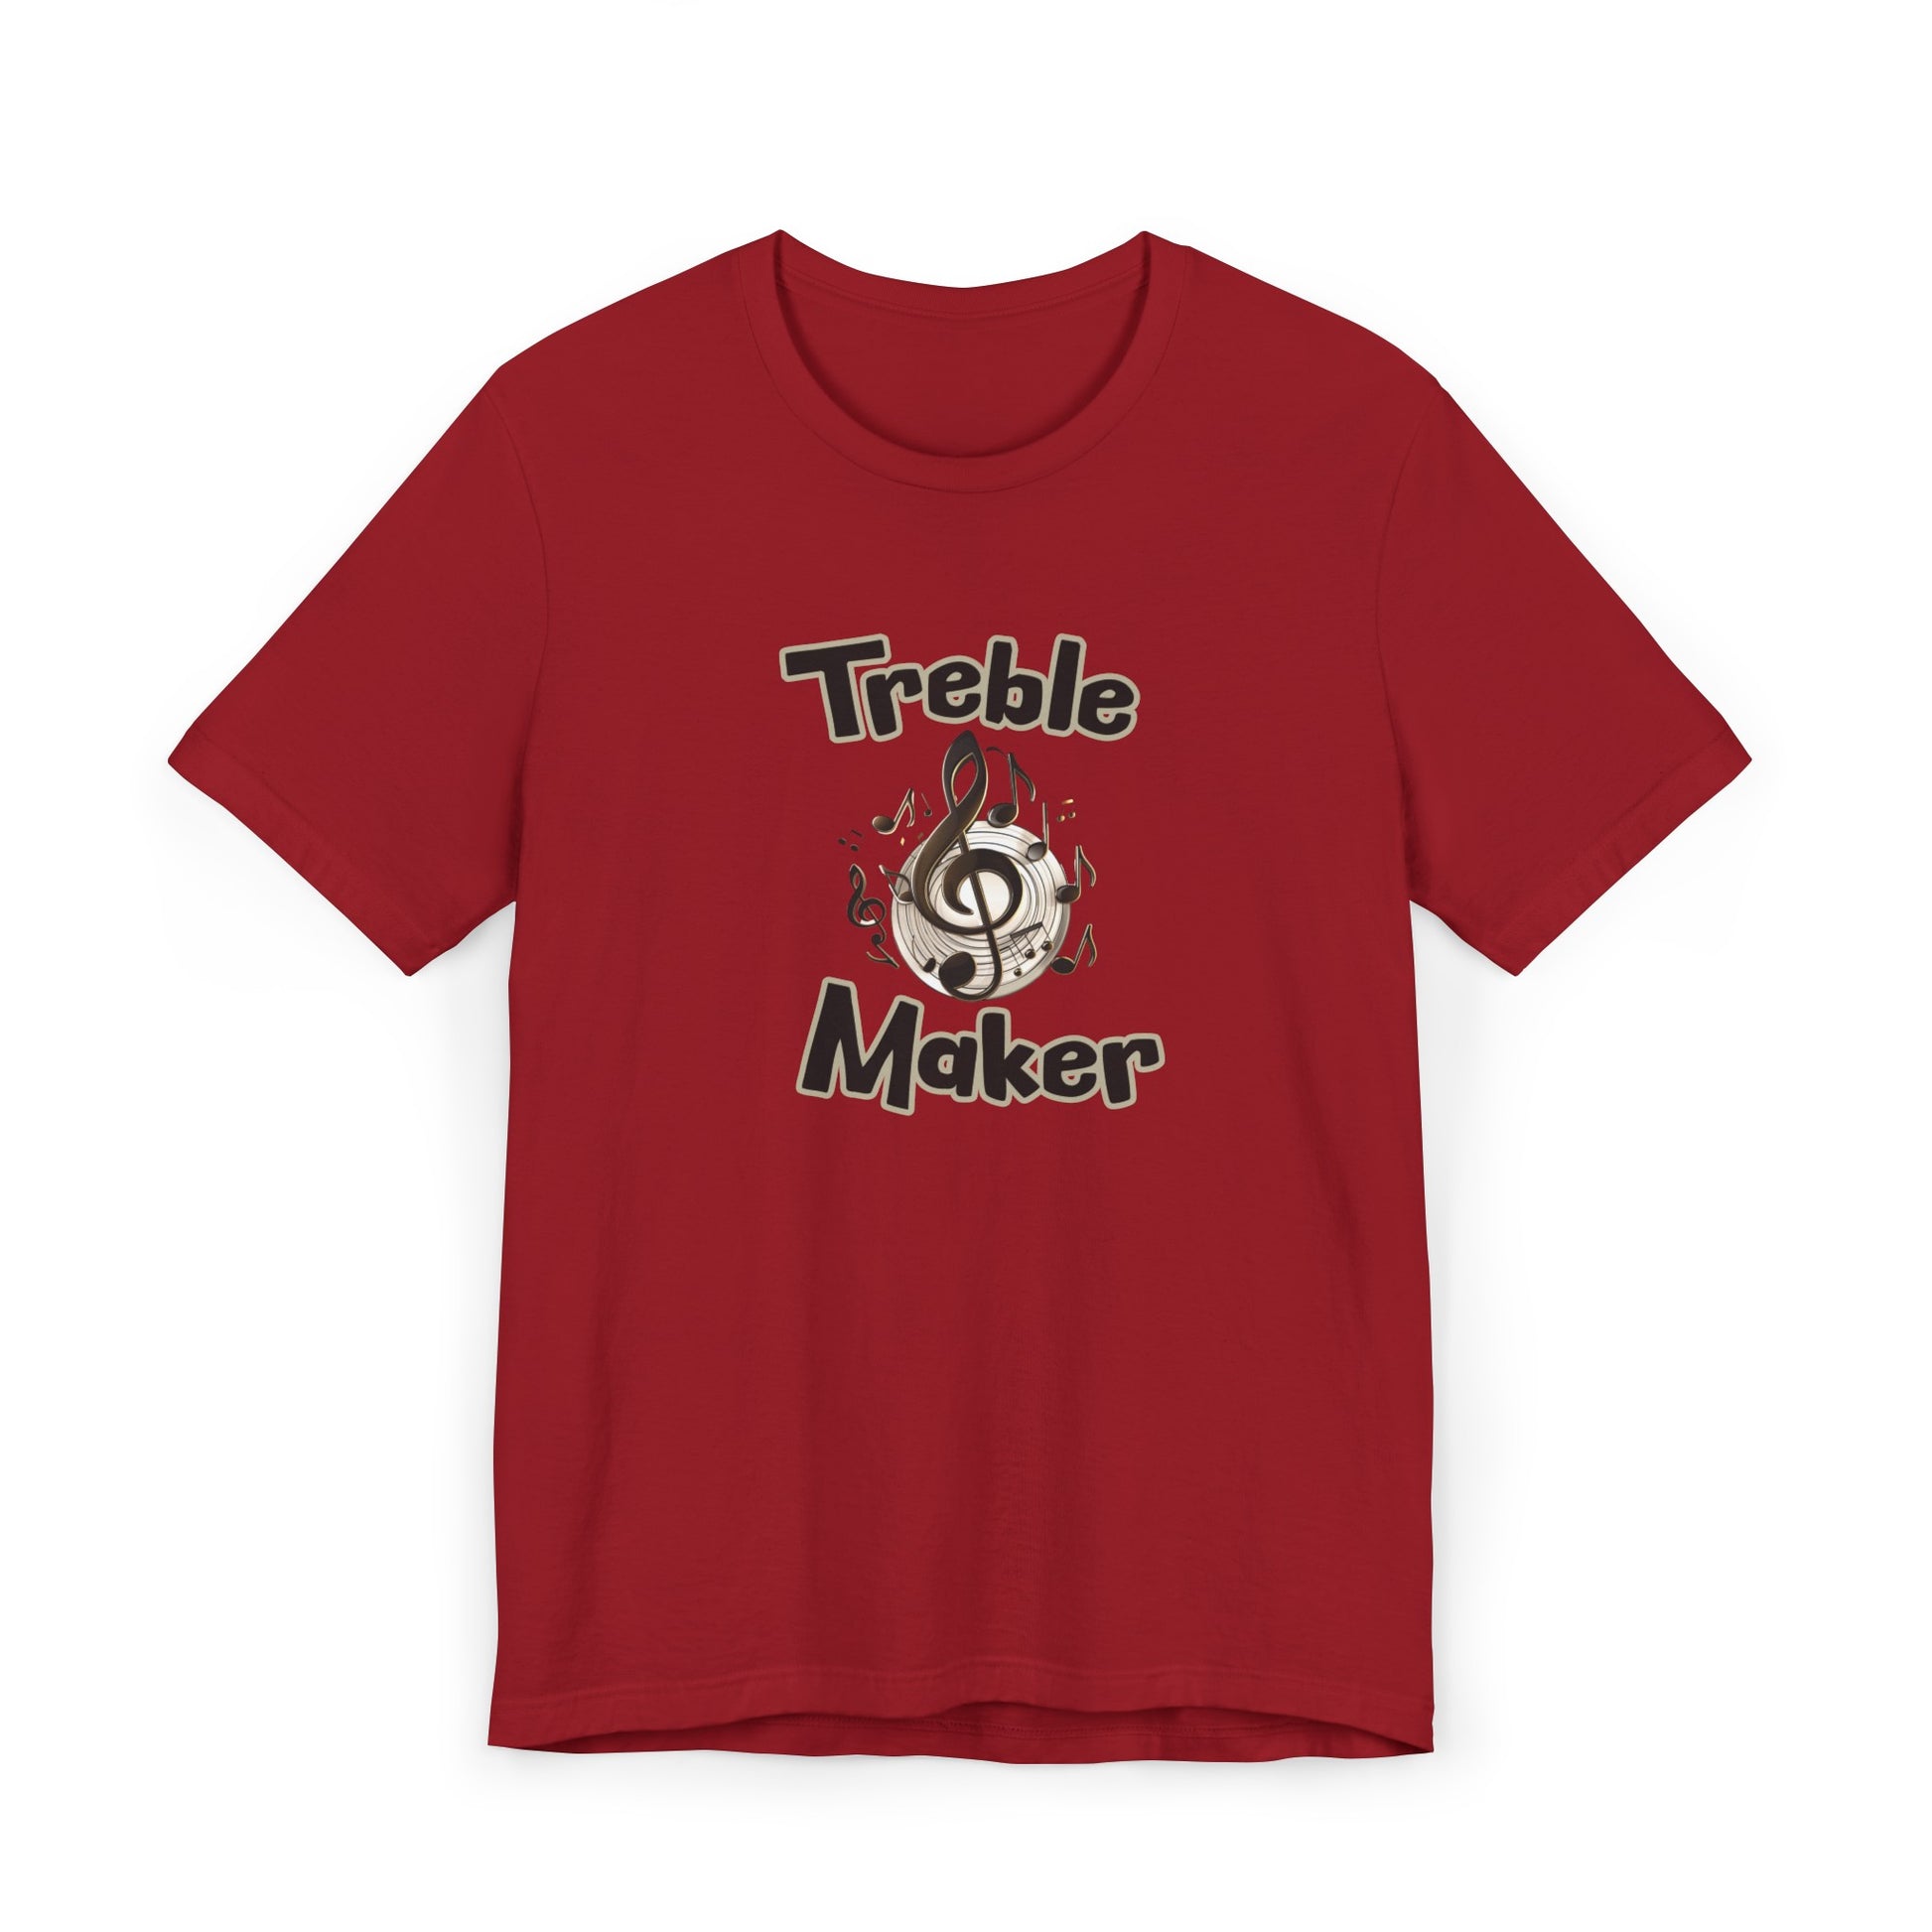 Treble Maker T-shirt Canvas Red Color musical notes graphic tee with text effects